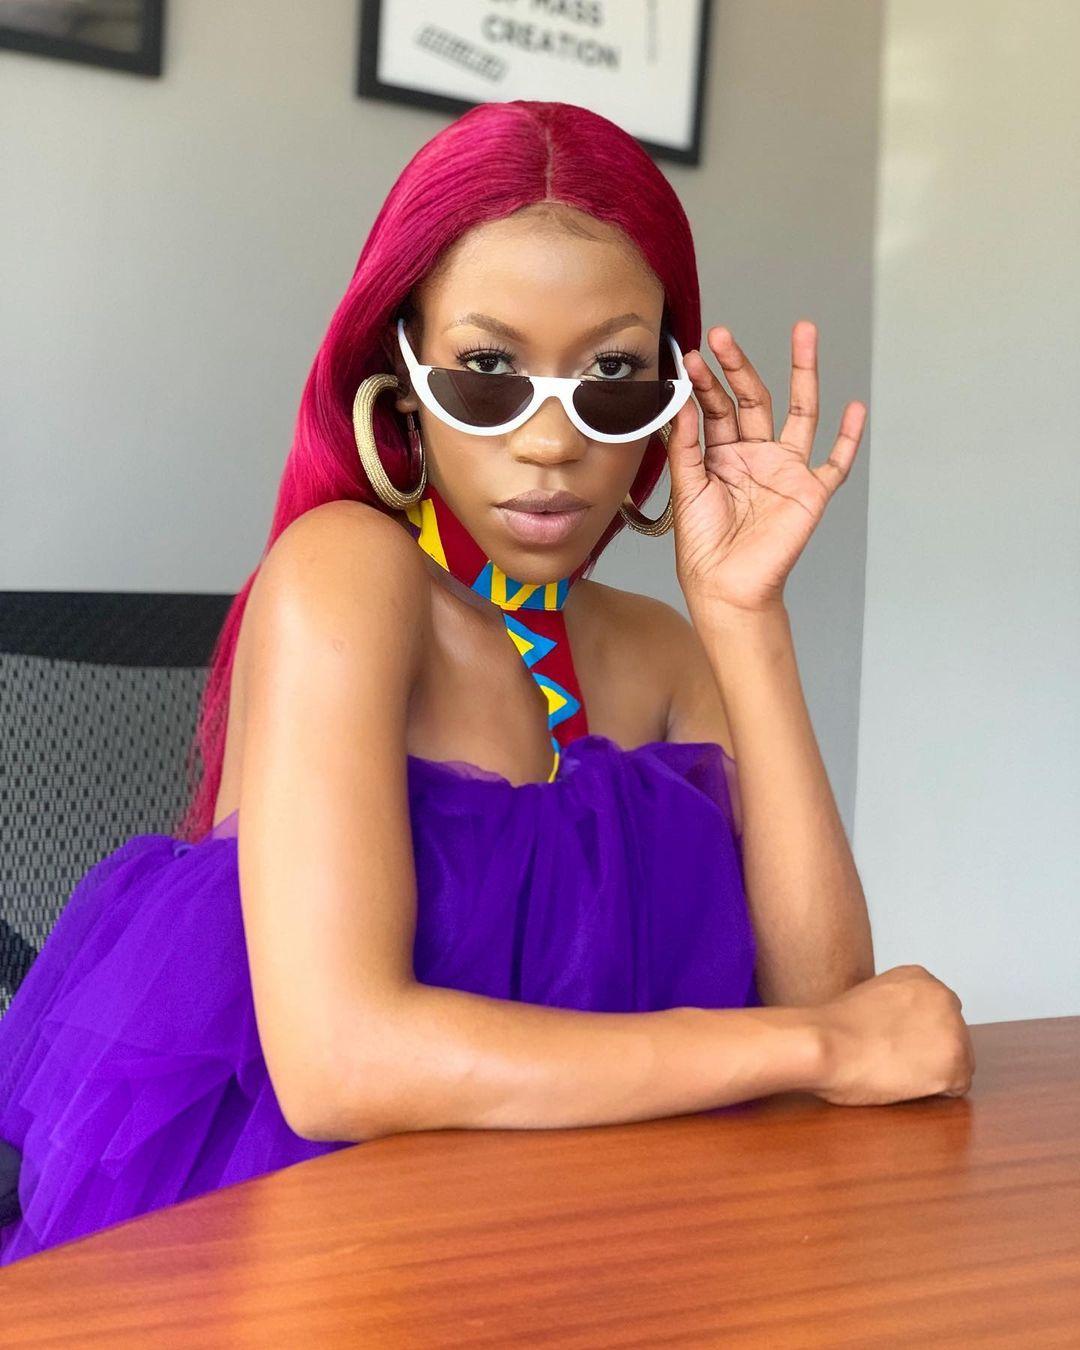 Moment Ugandan singer, Vinka, stomped a fan who tried to touch her genitalia (Video)